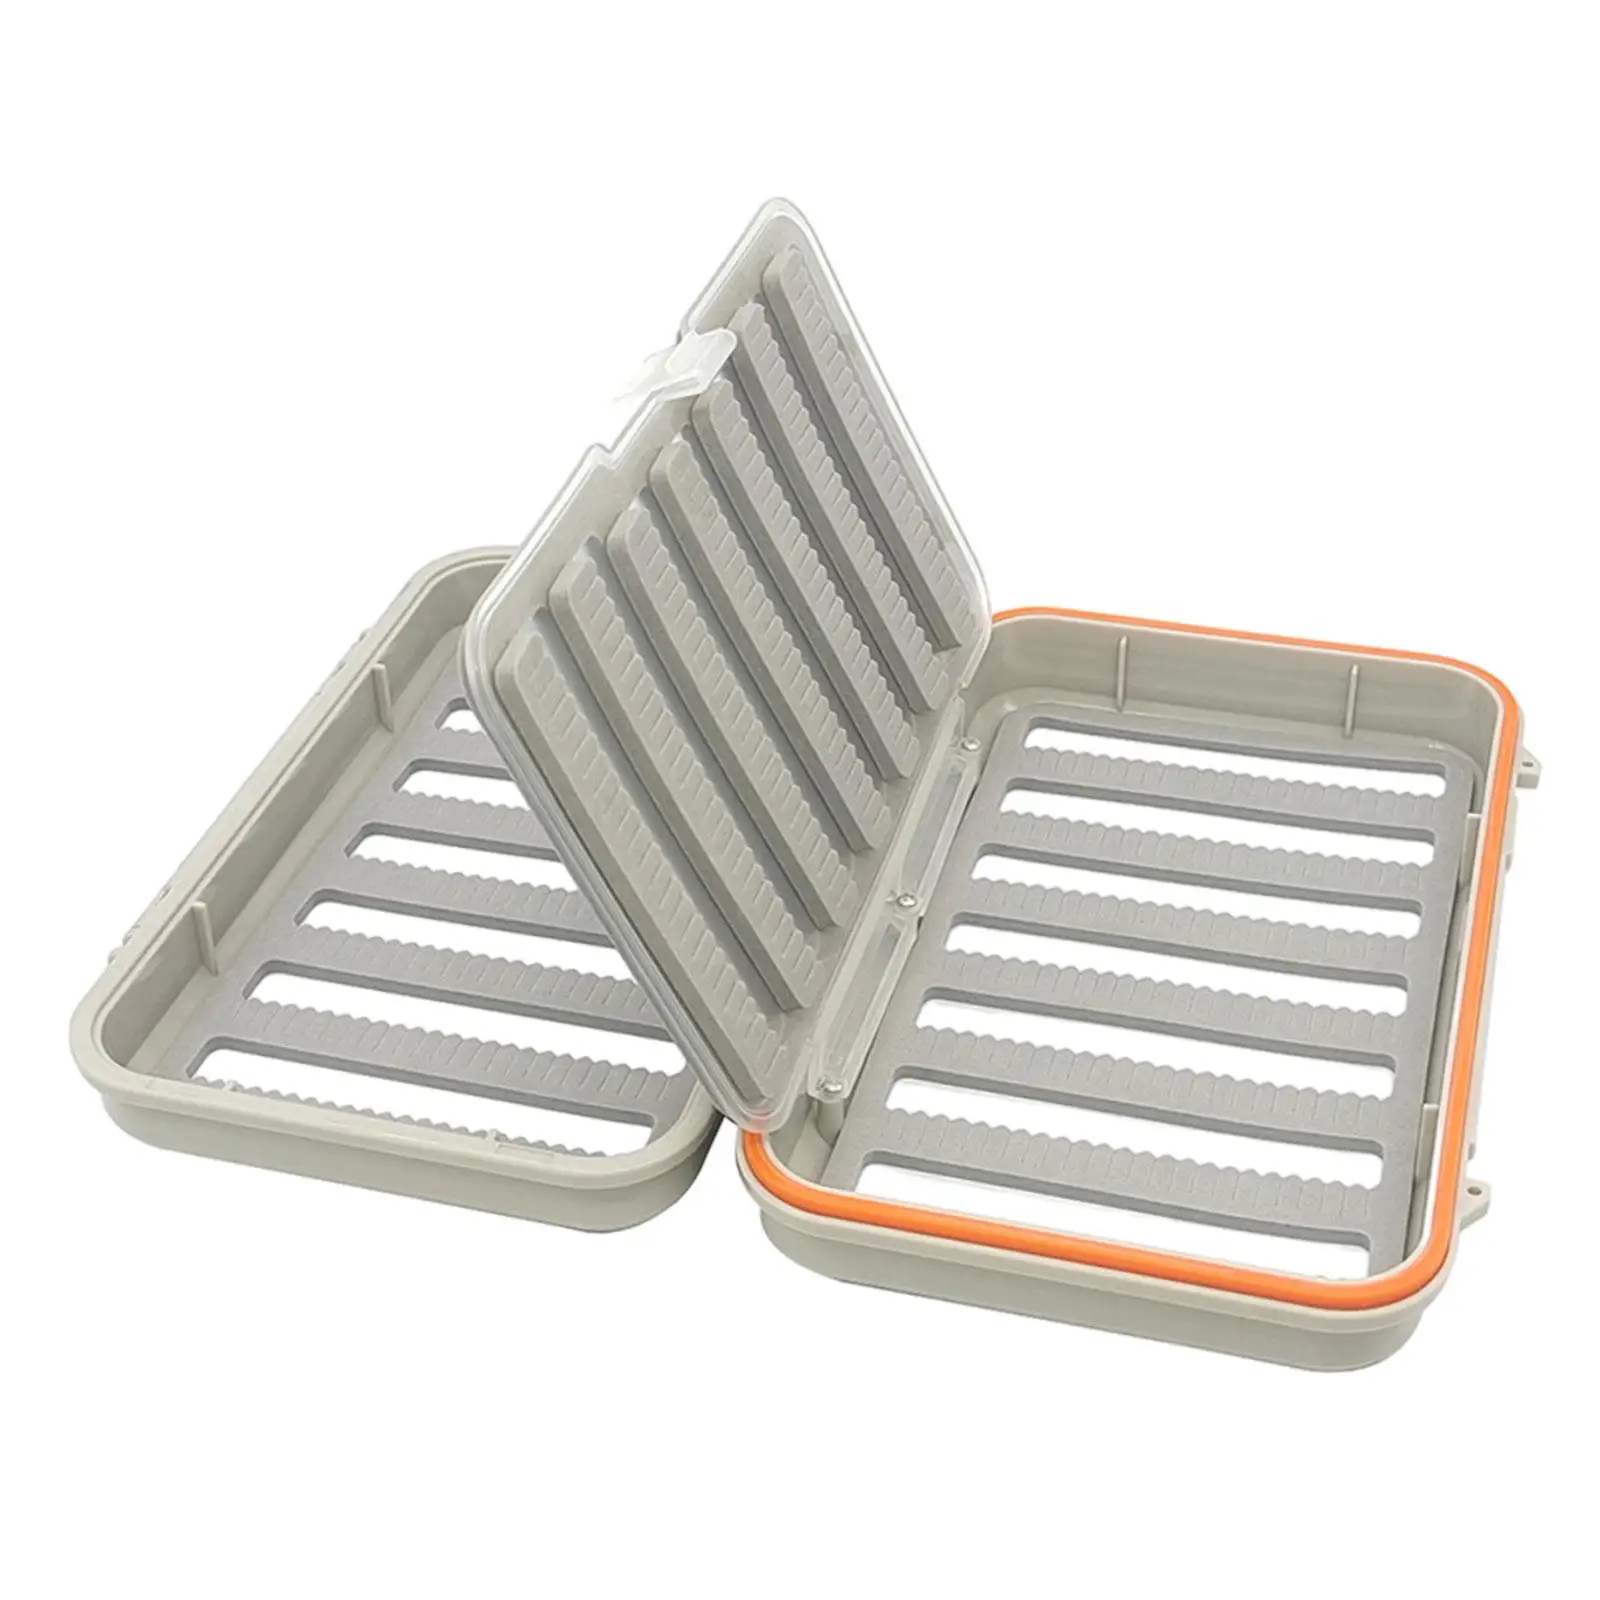 Fly Fishing Storage Case Container Fishing Tackle Box Foam Insert Jig Box